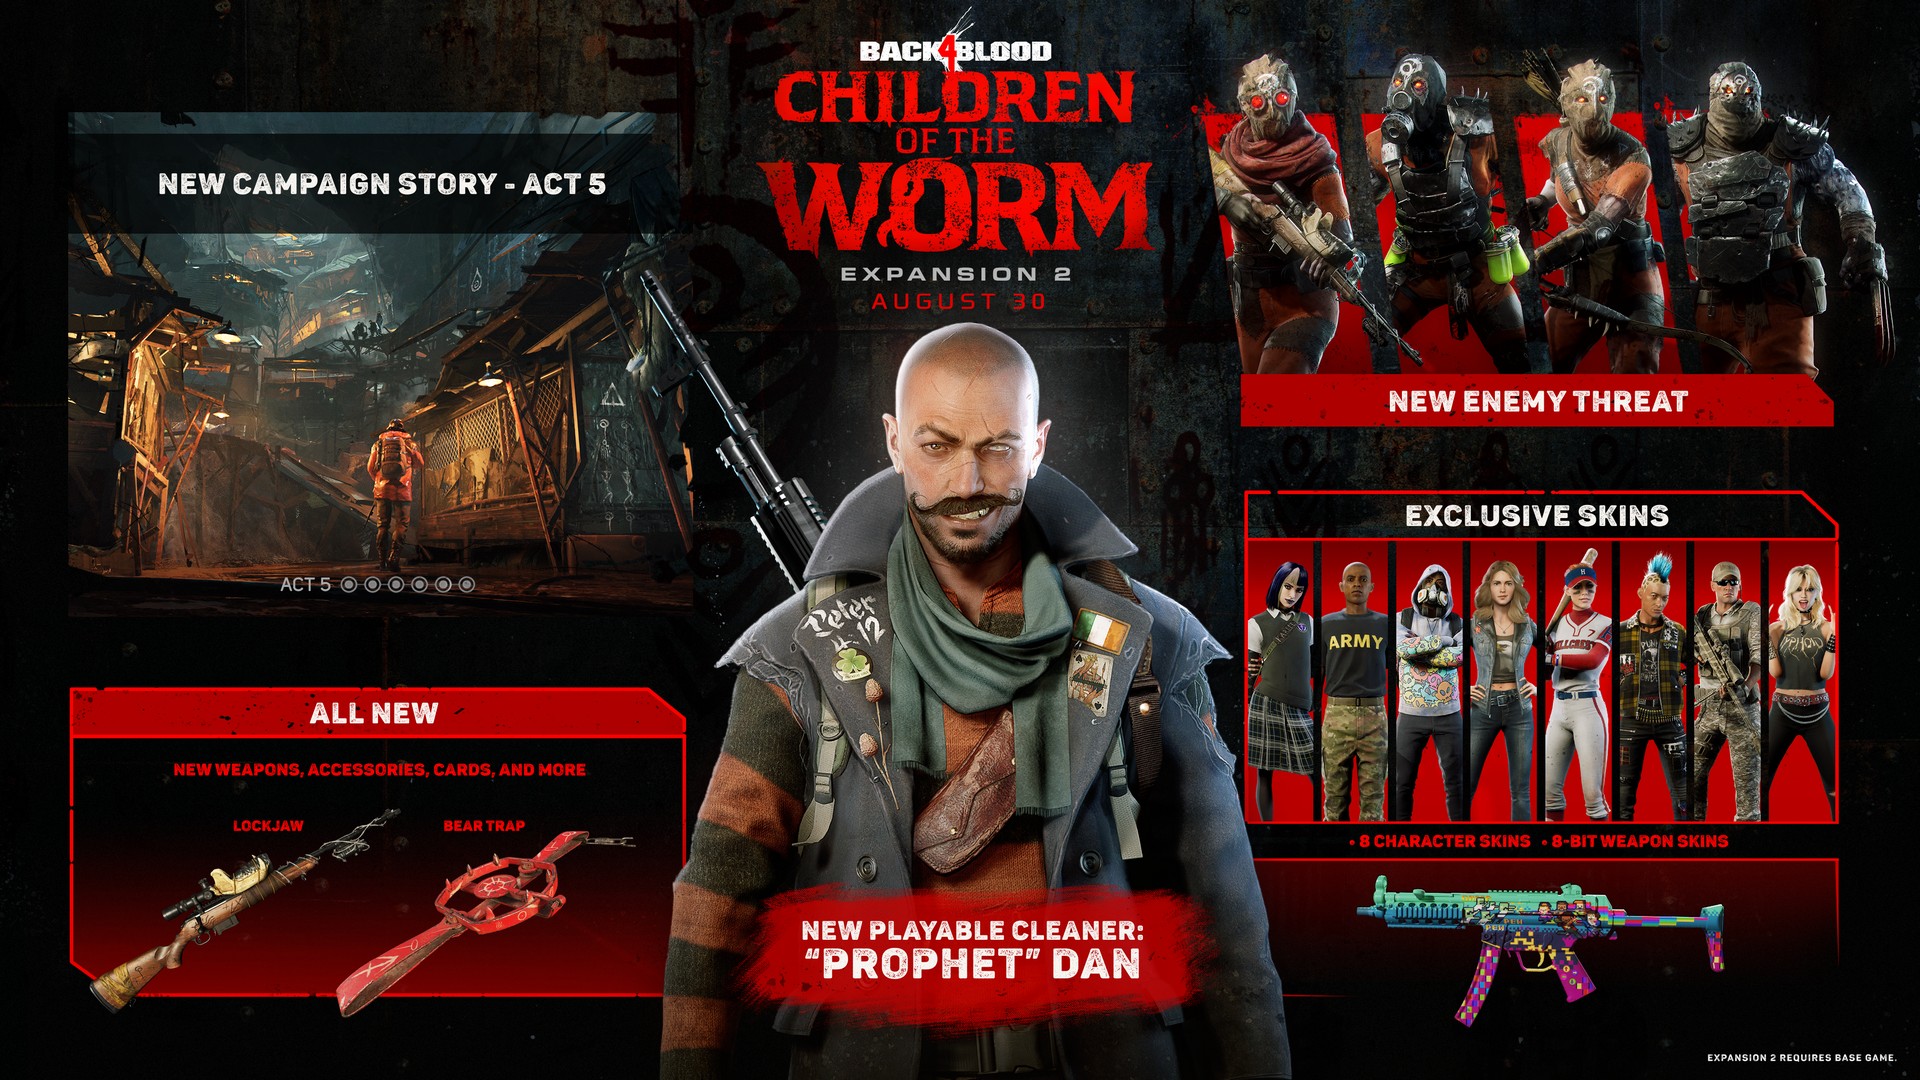 Back 4 Blood DLC Expansion 2 Announced As “Children Of The Worm” – Arriving August 31st